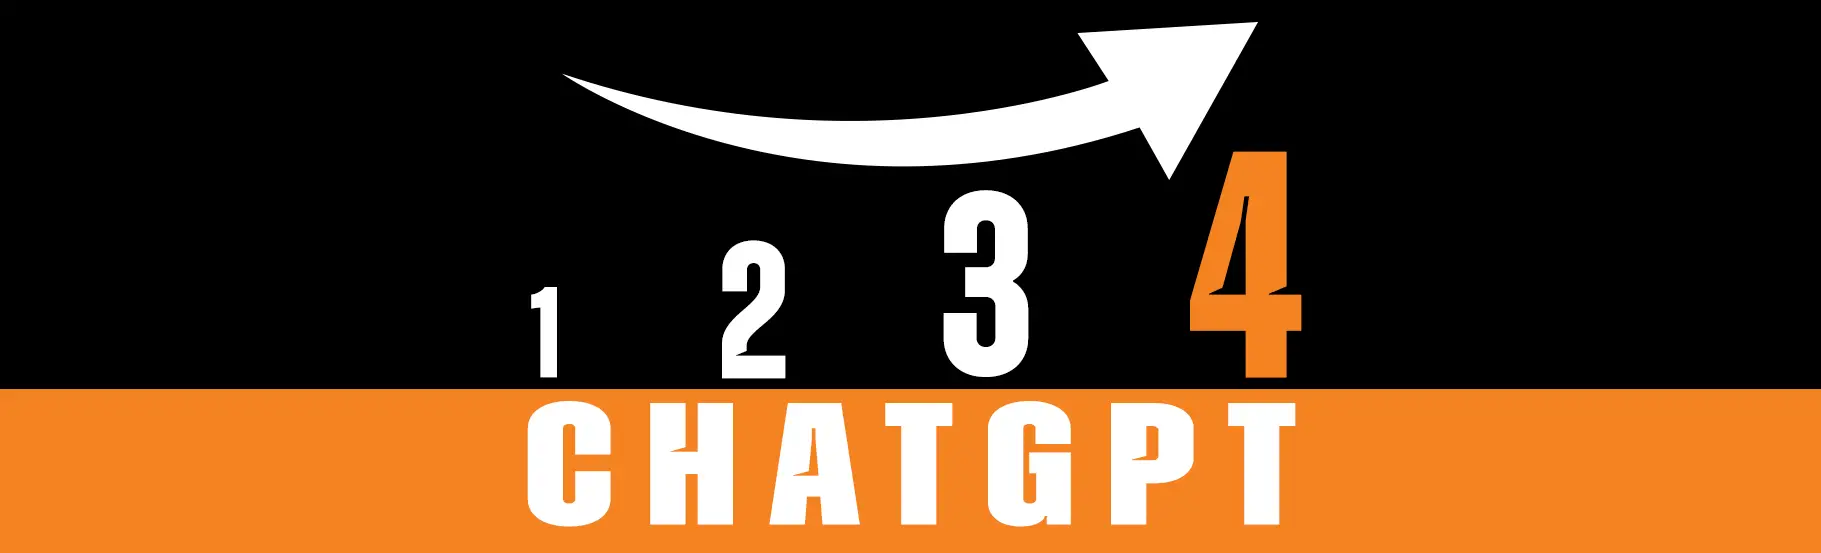 What’s new in ChatGPT-4 compared to previous versions?